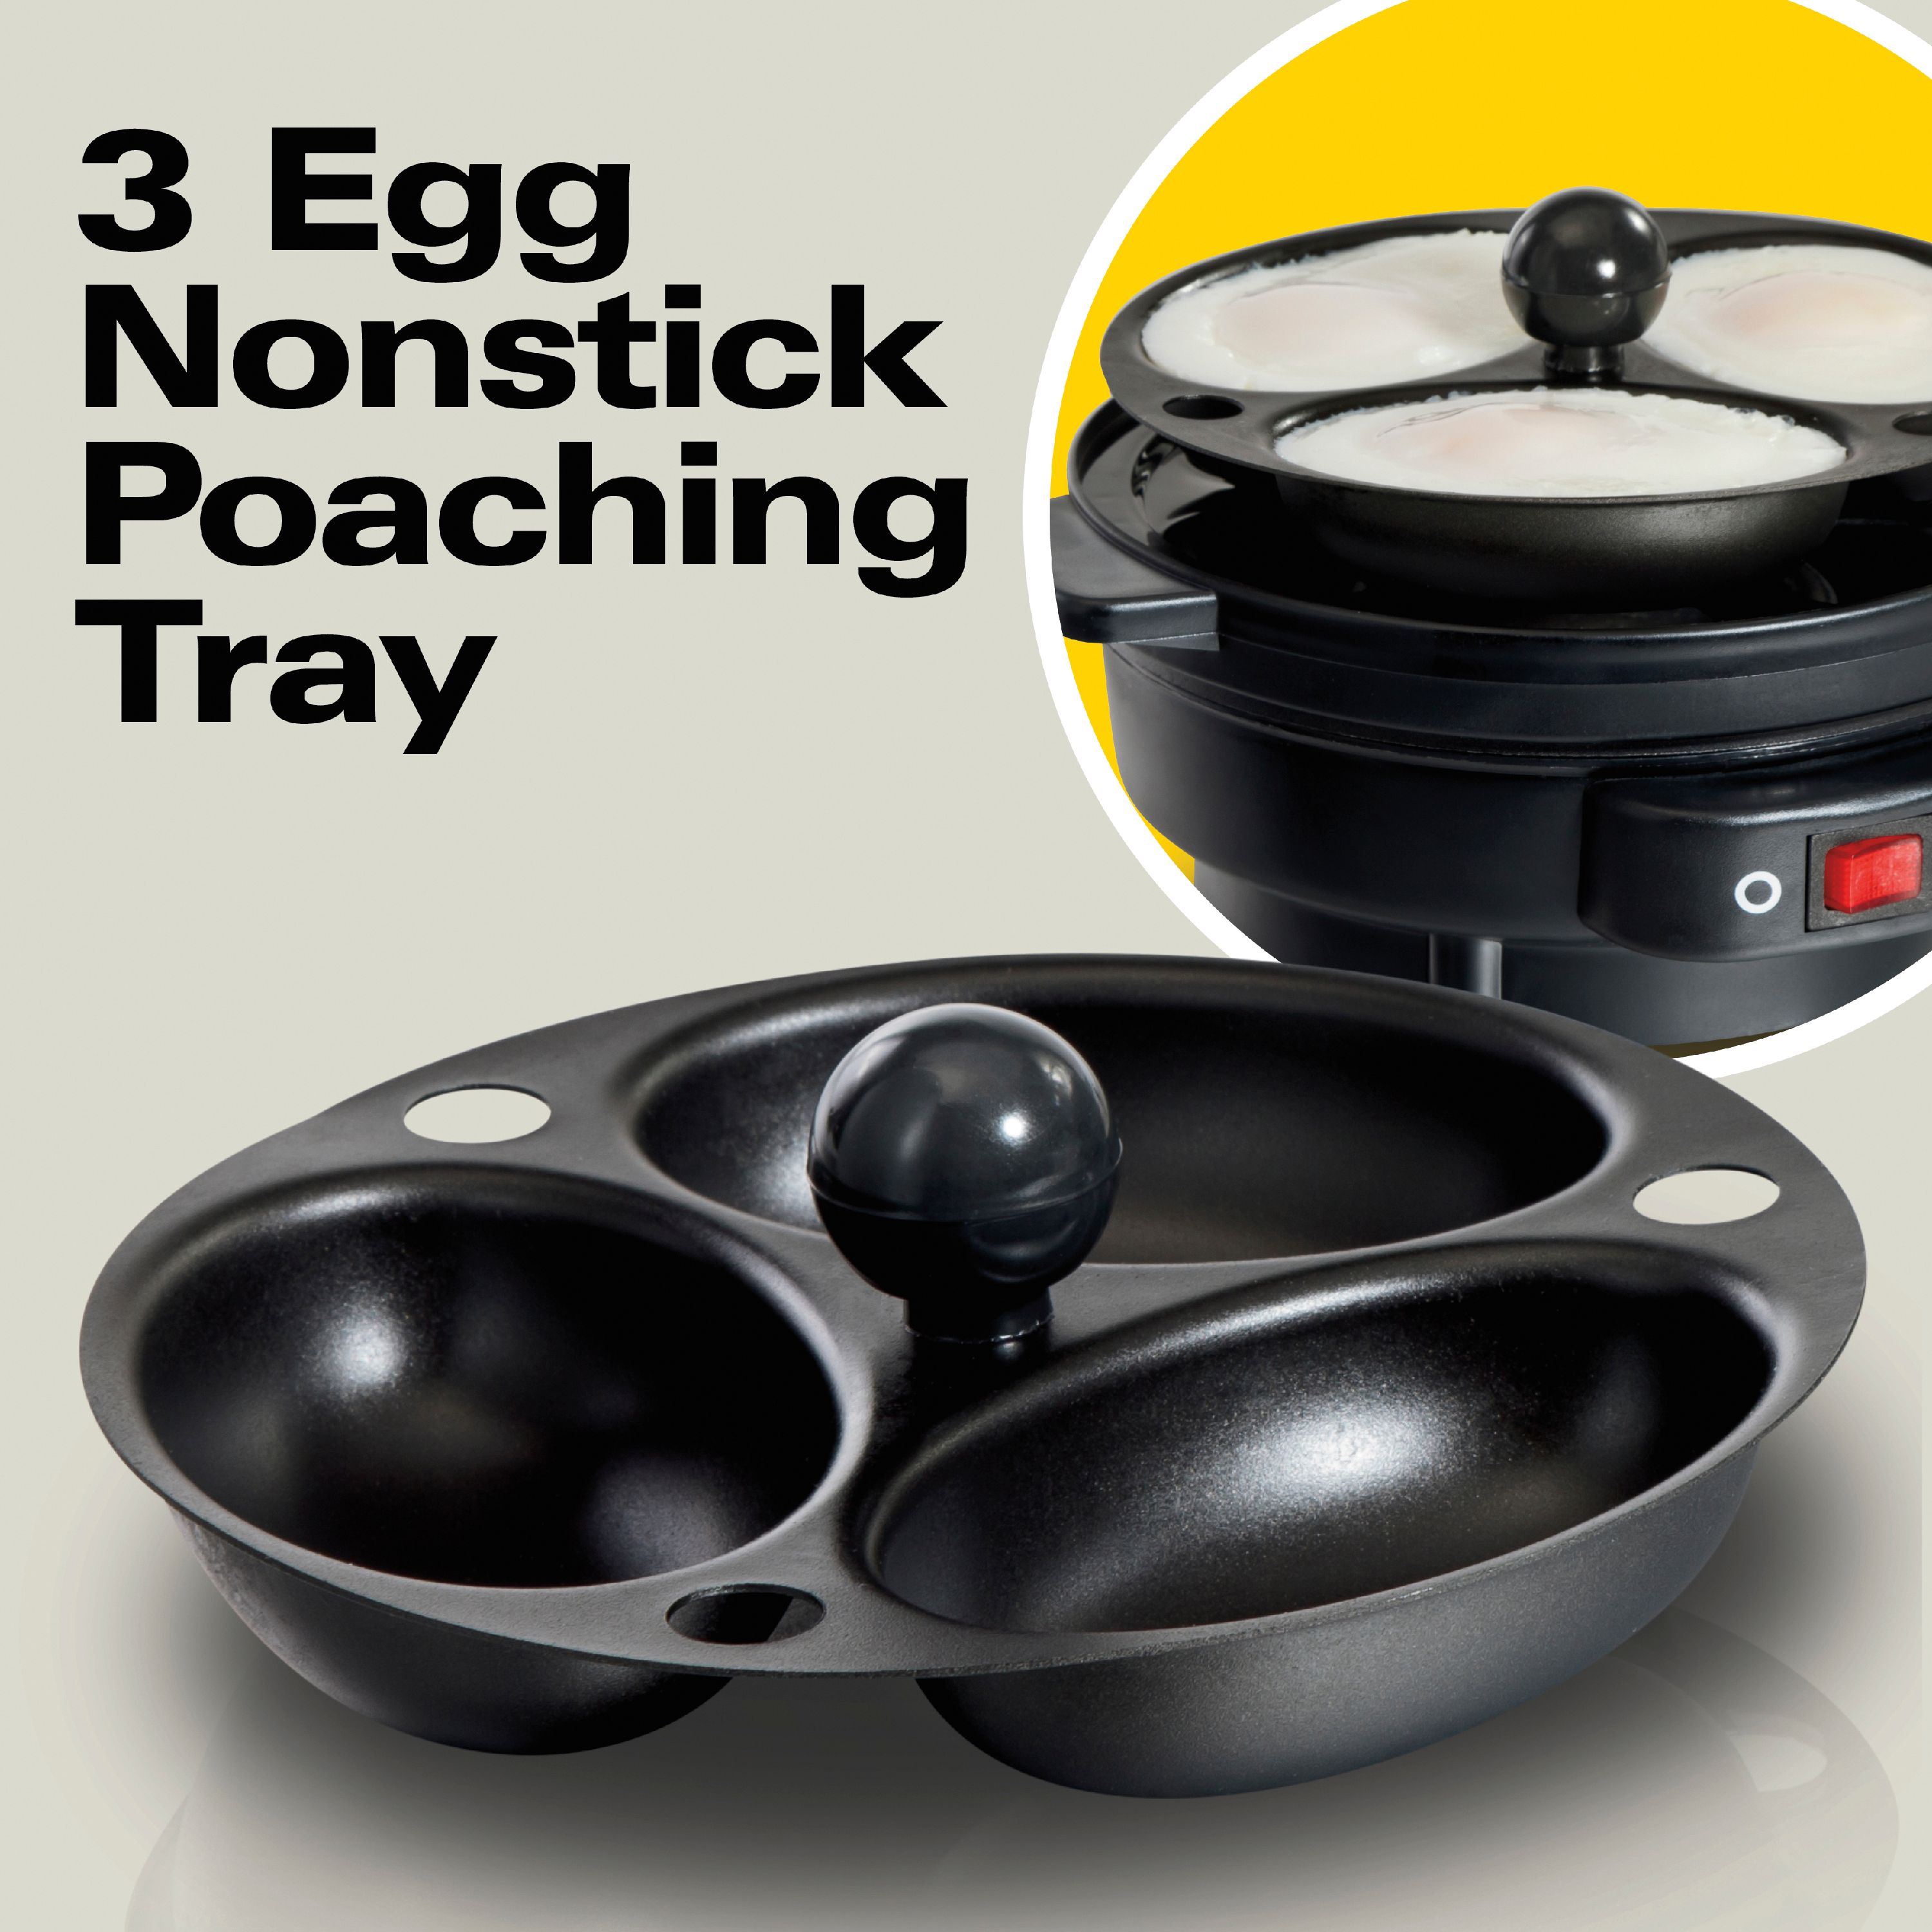 Hamilton Beach Egg Cooker with Built-In Timer and Poaching Tray, 7 Eggs, Black, 25500 - image 5 of 13